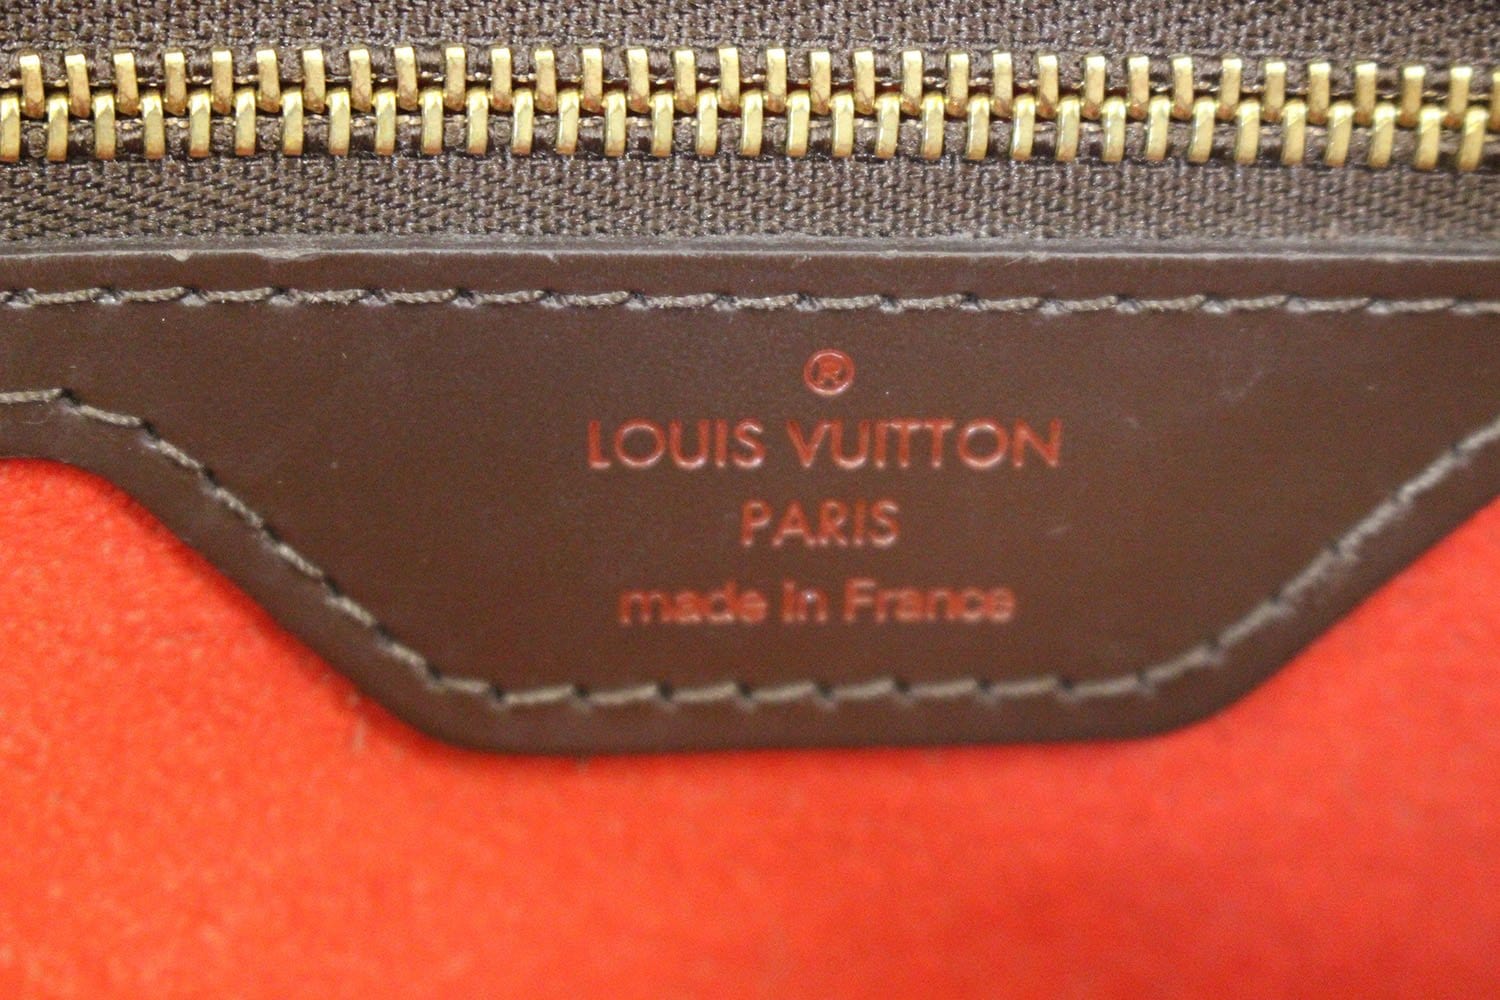 bagages, cash and louis vuitton - image #7643013 on